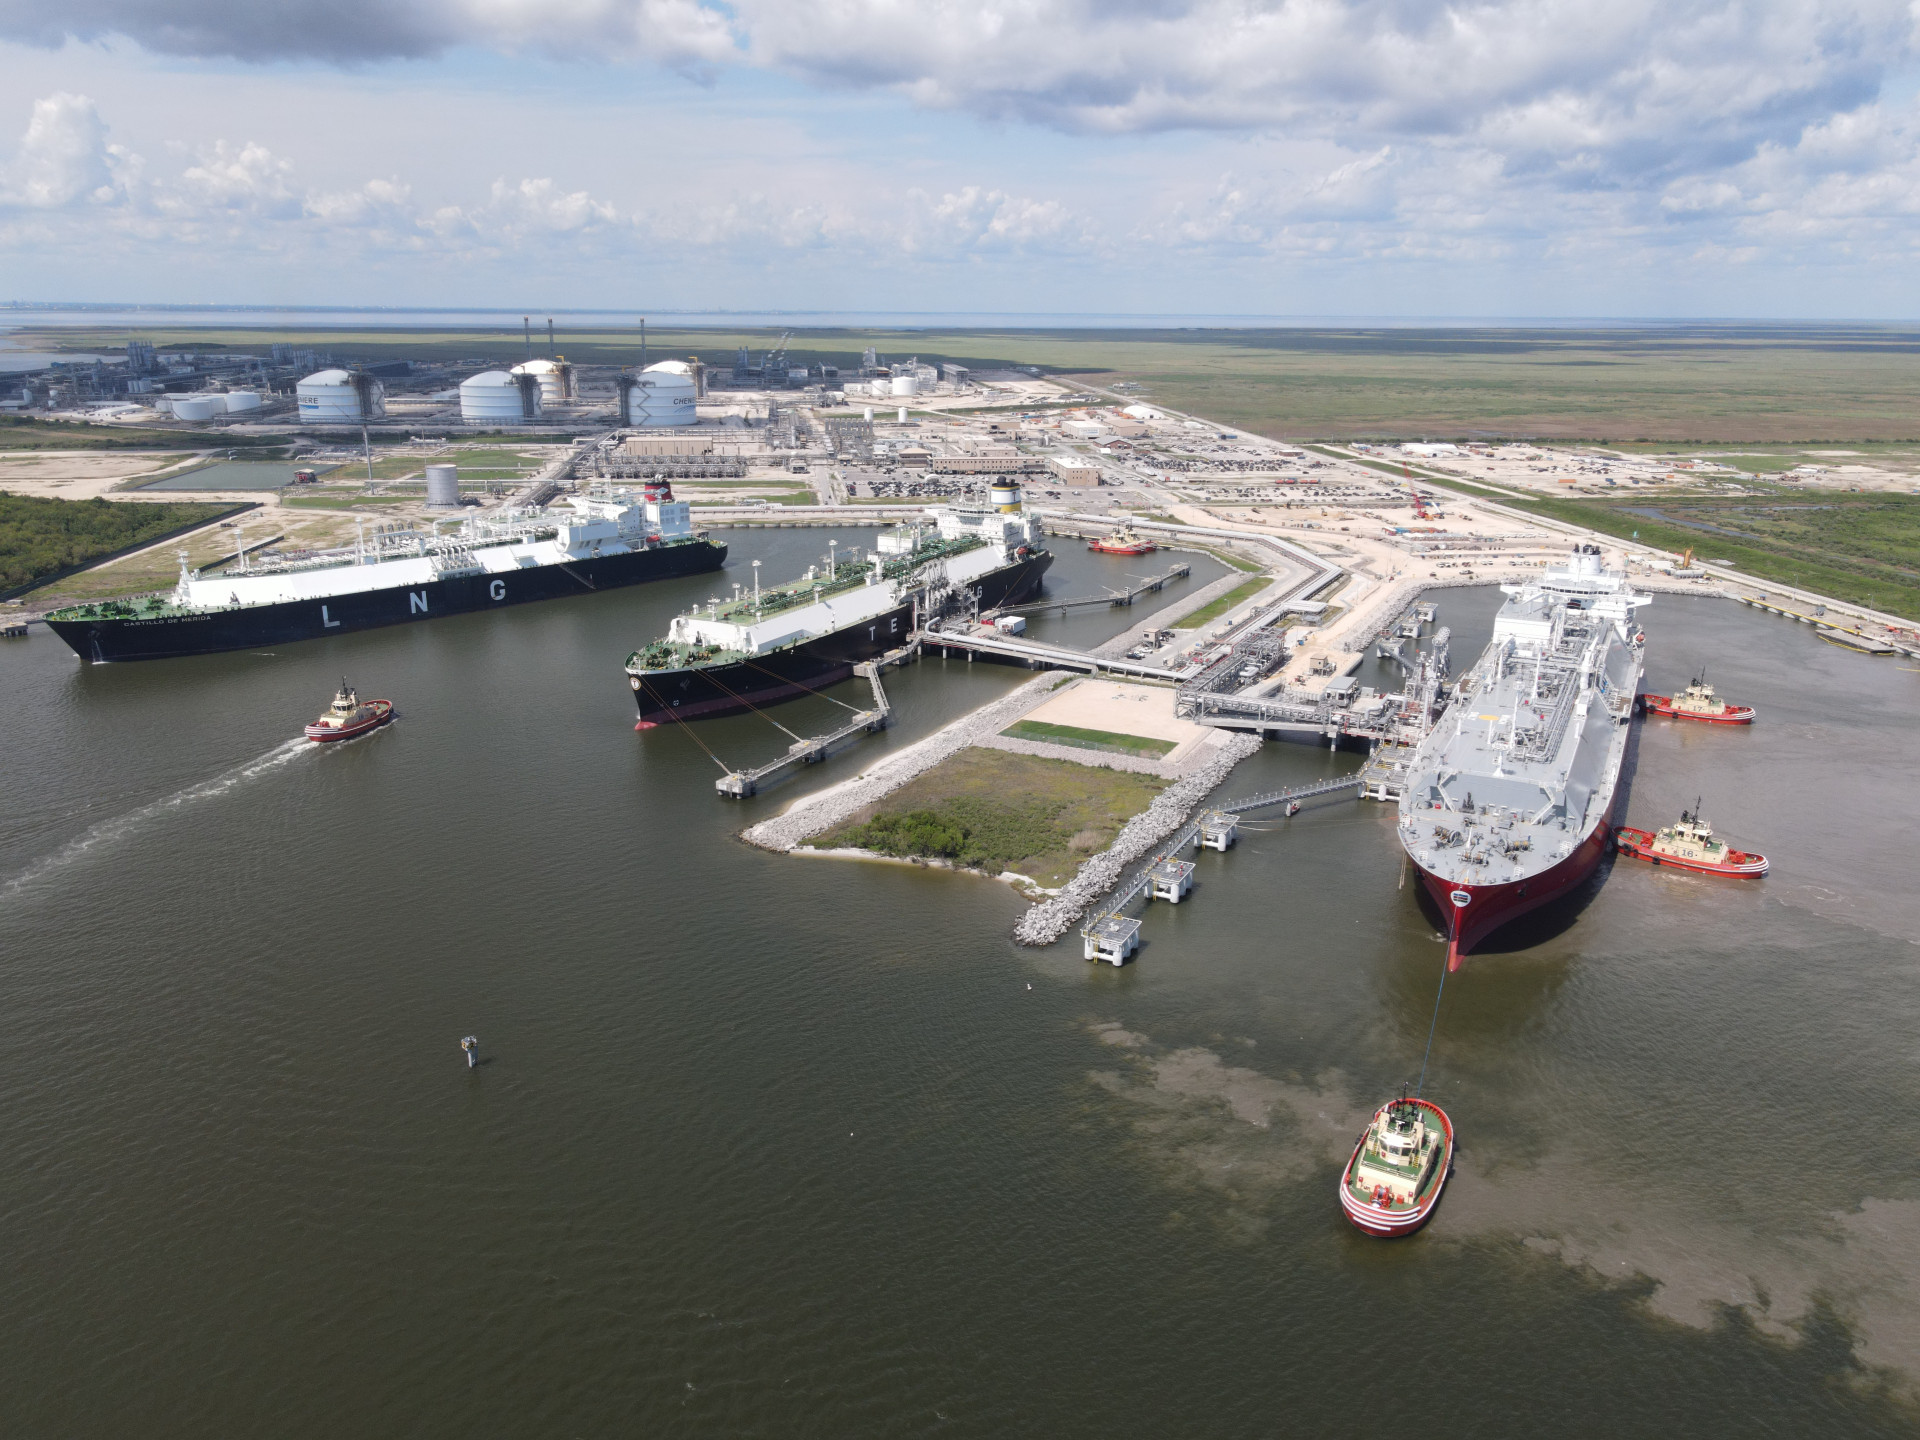 US weekly LNG exports down to 23 cargoes